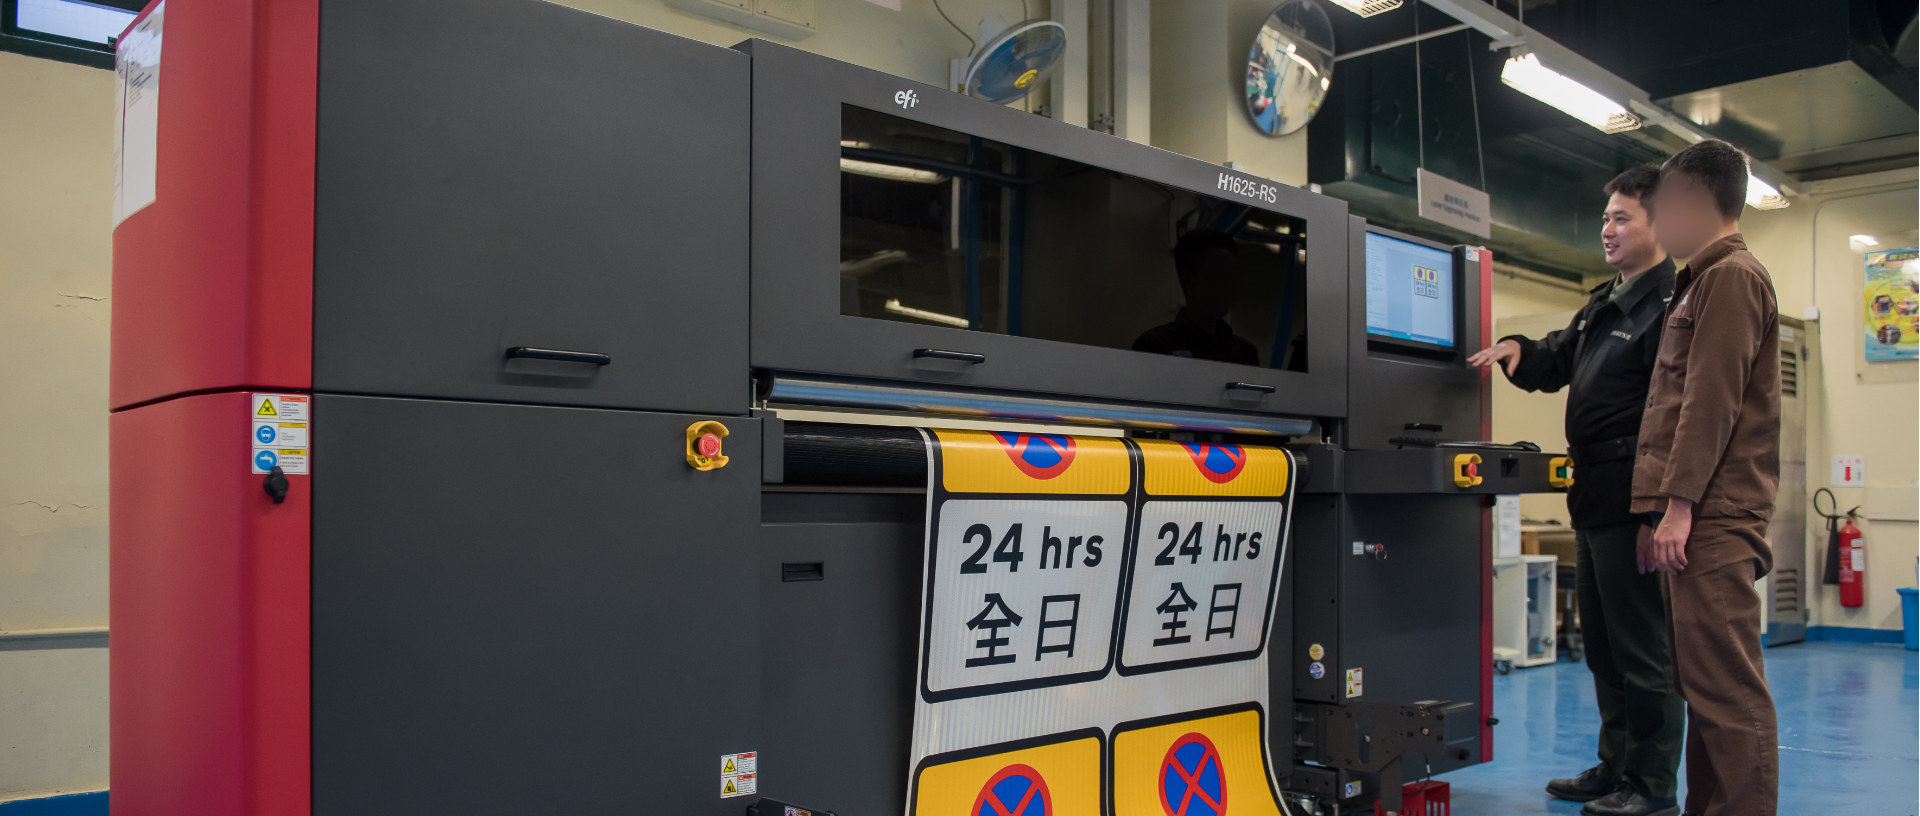 A new UV Ink Digital Printer has been installed at the Sign-making Workshop in Pak Sha Wan Correctional Institution to reduce production time and raise product quality through direct printing of graphics on reflective sheeting.